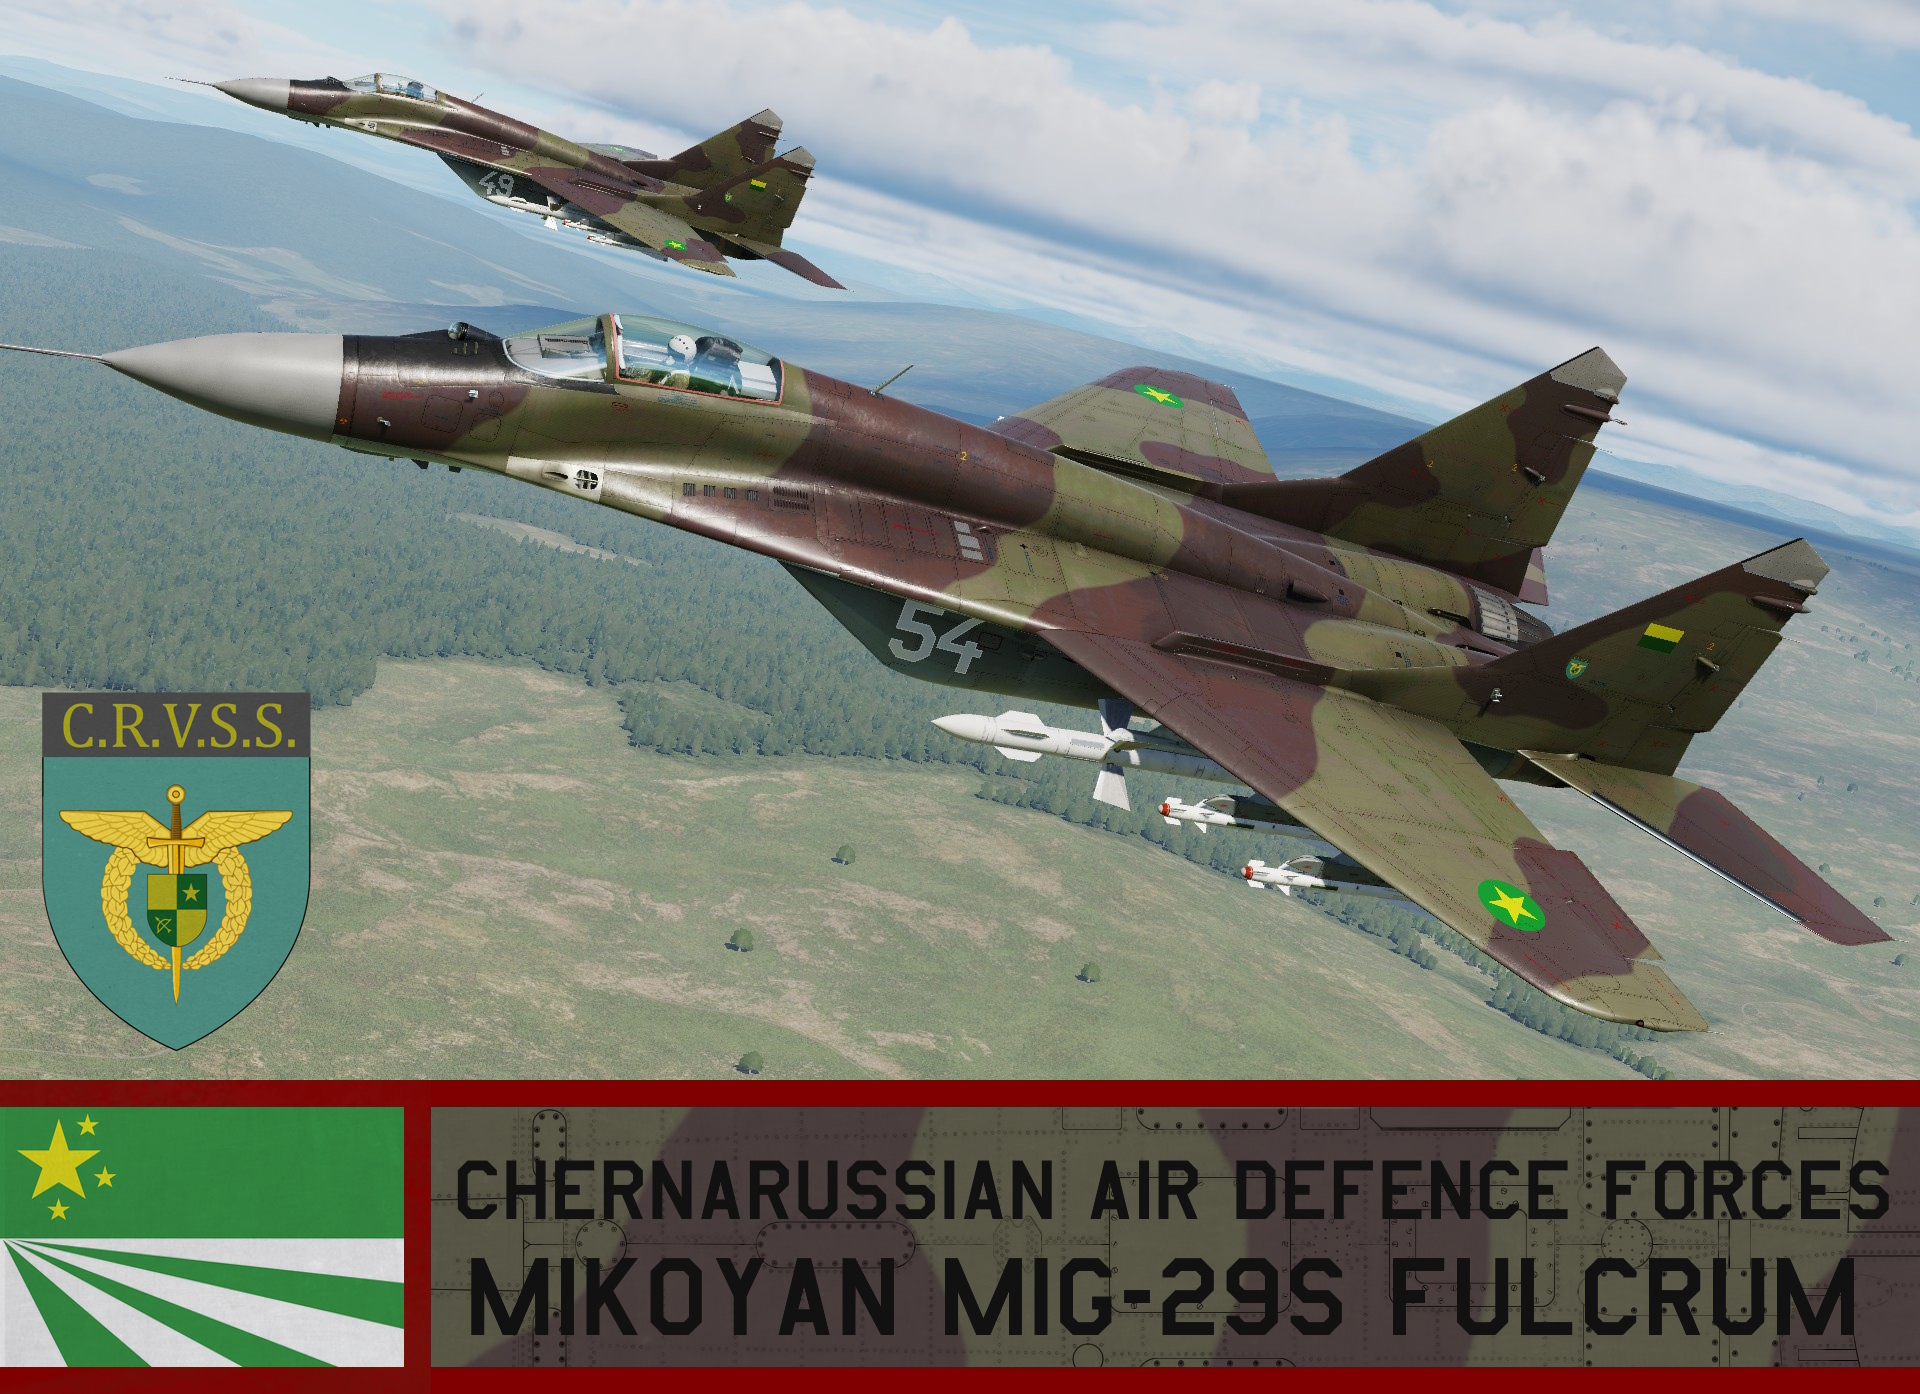 Chernarussian Air Defence Force MiG-29S Fulcrum - ArmA II